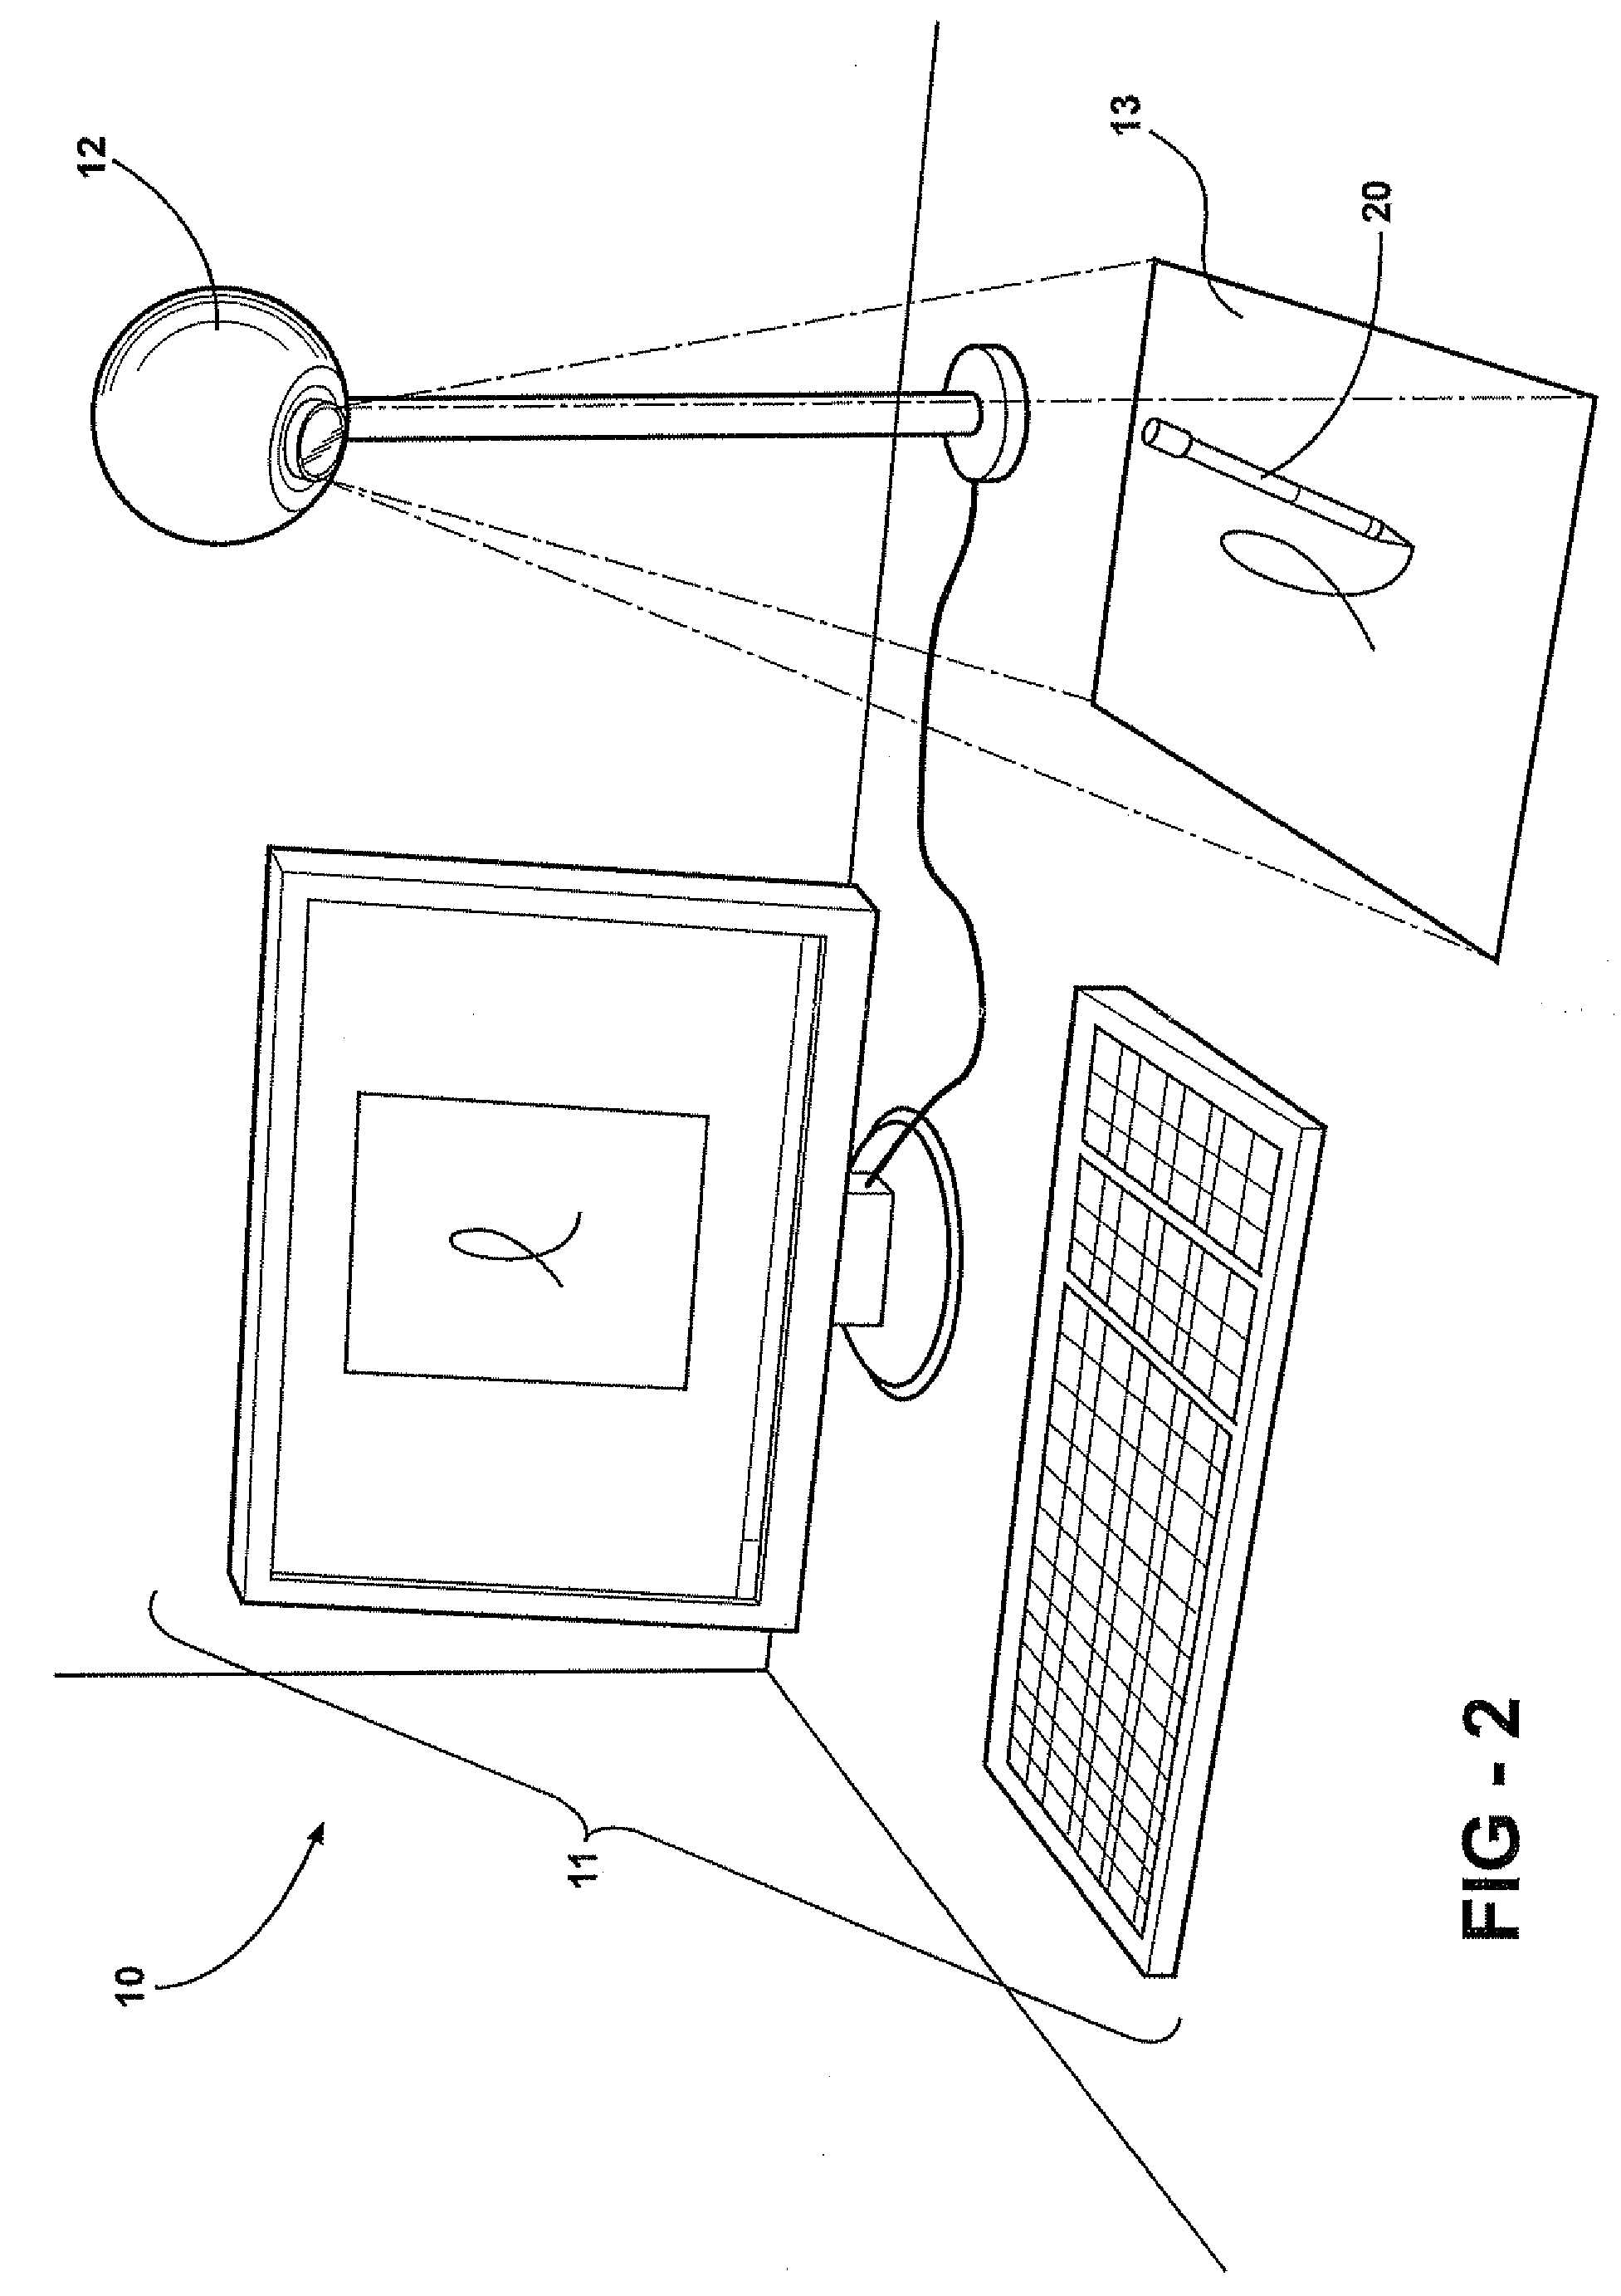 Method for identifying color in machine and computer vision applications